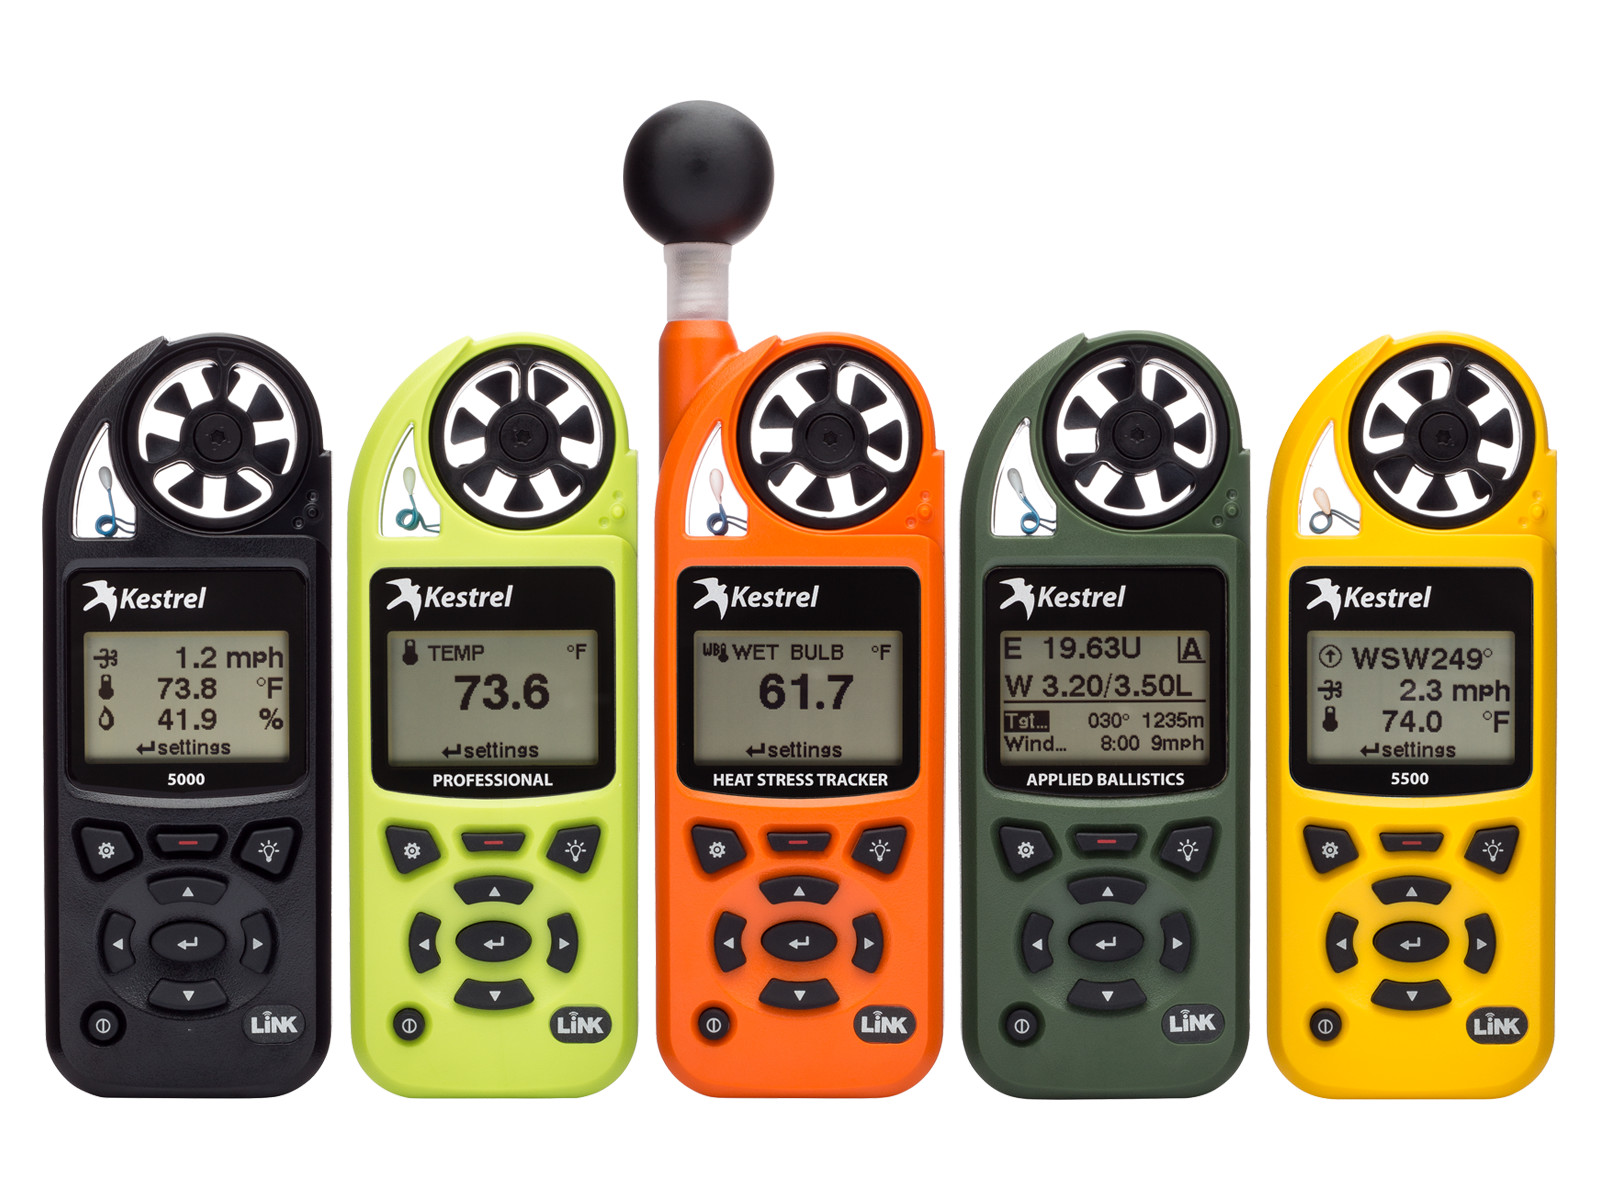 How The Kestrel Became The iPhone Of Weather Meters